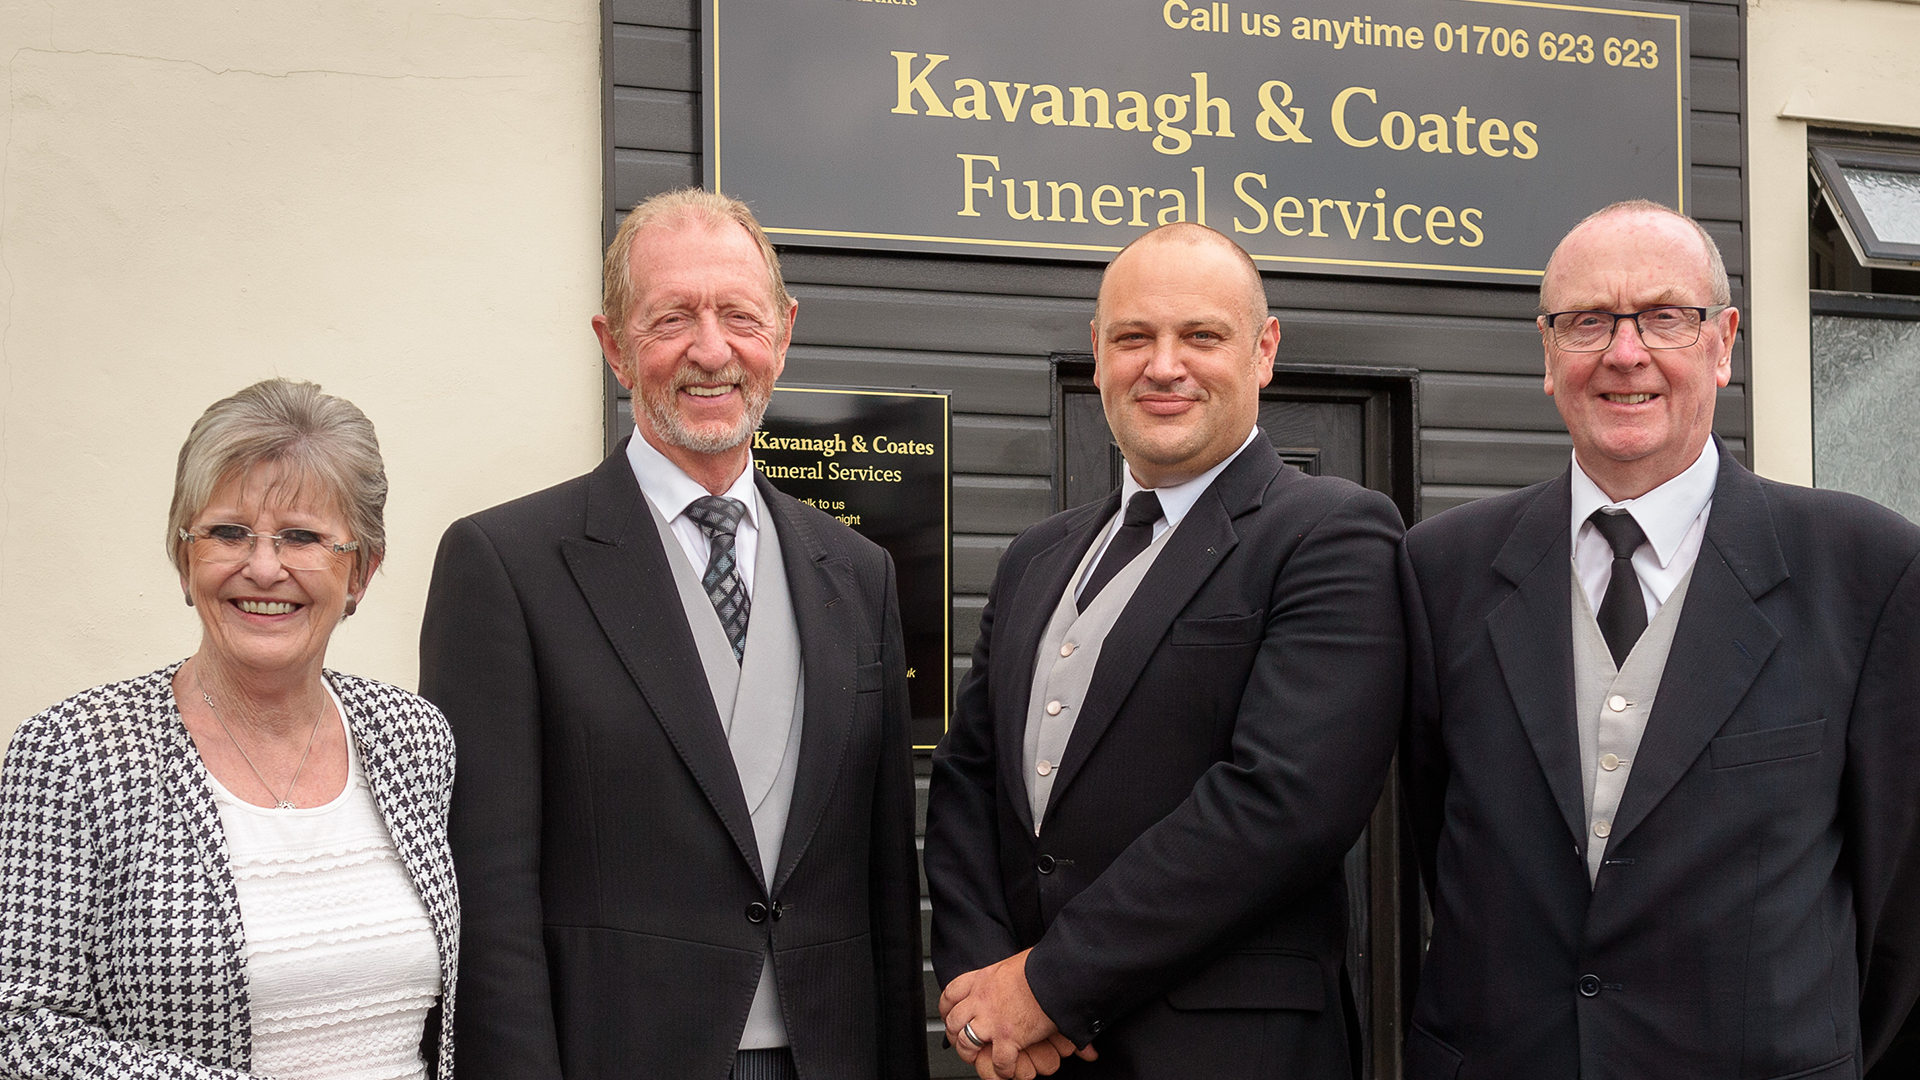 Images Kavanagh & Coates Funeral Services